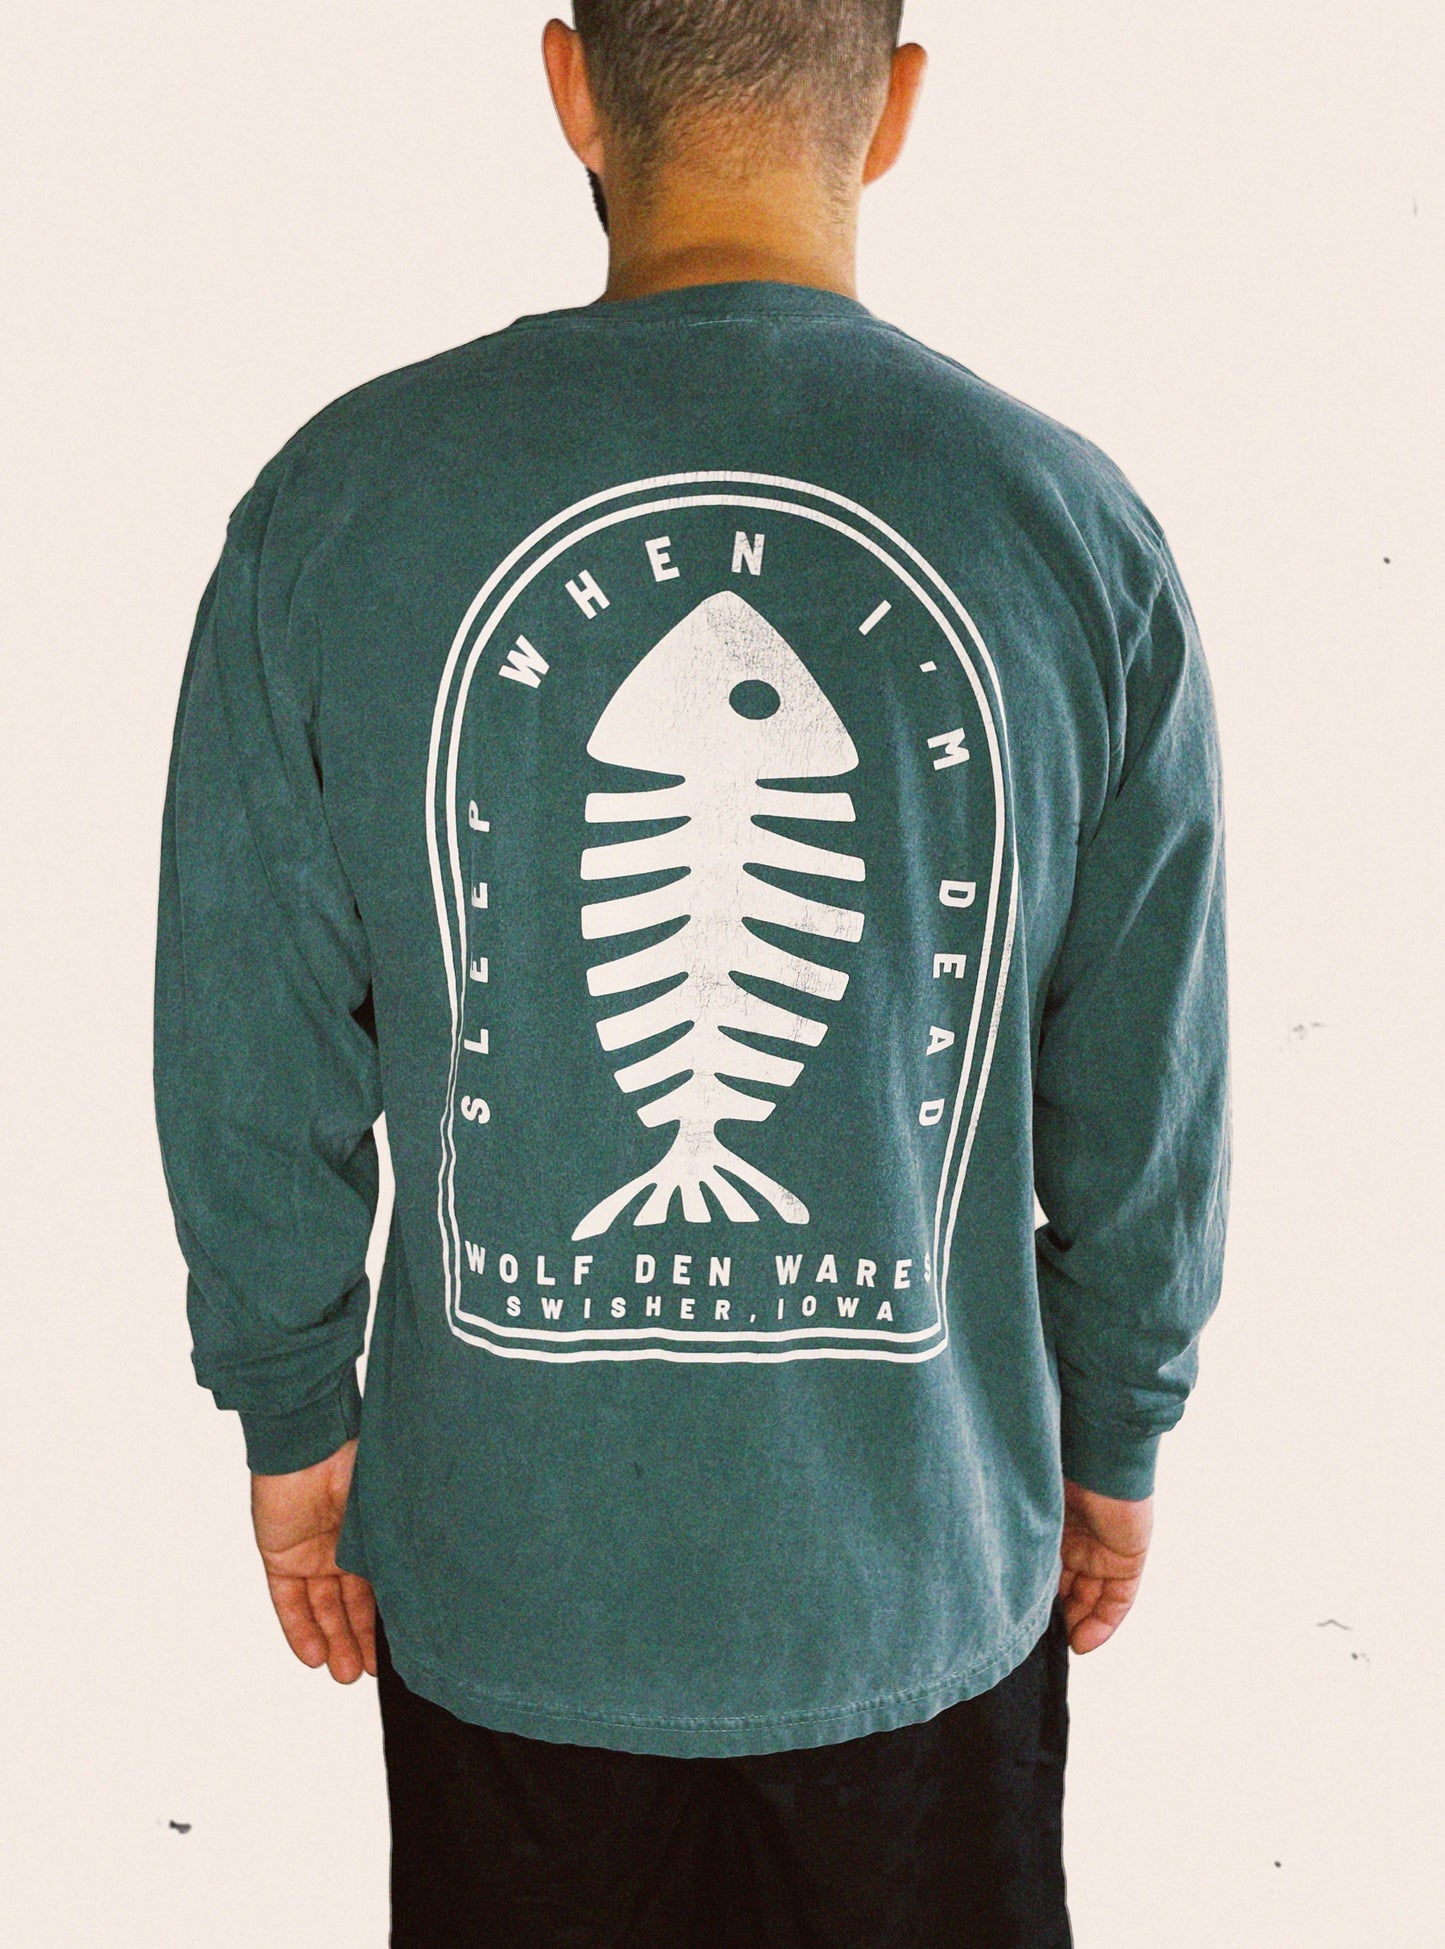 Blue spruce Comfort Colors long sleeve tee embellished with a fish skeleton logo and the words SLEEP WHEN I'M DEAD, WOLF DEN WARES, SWISHER, IOWA